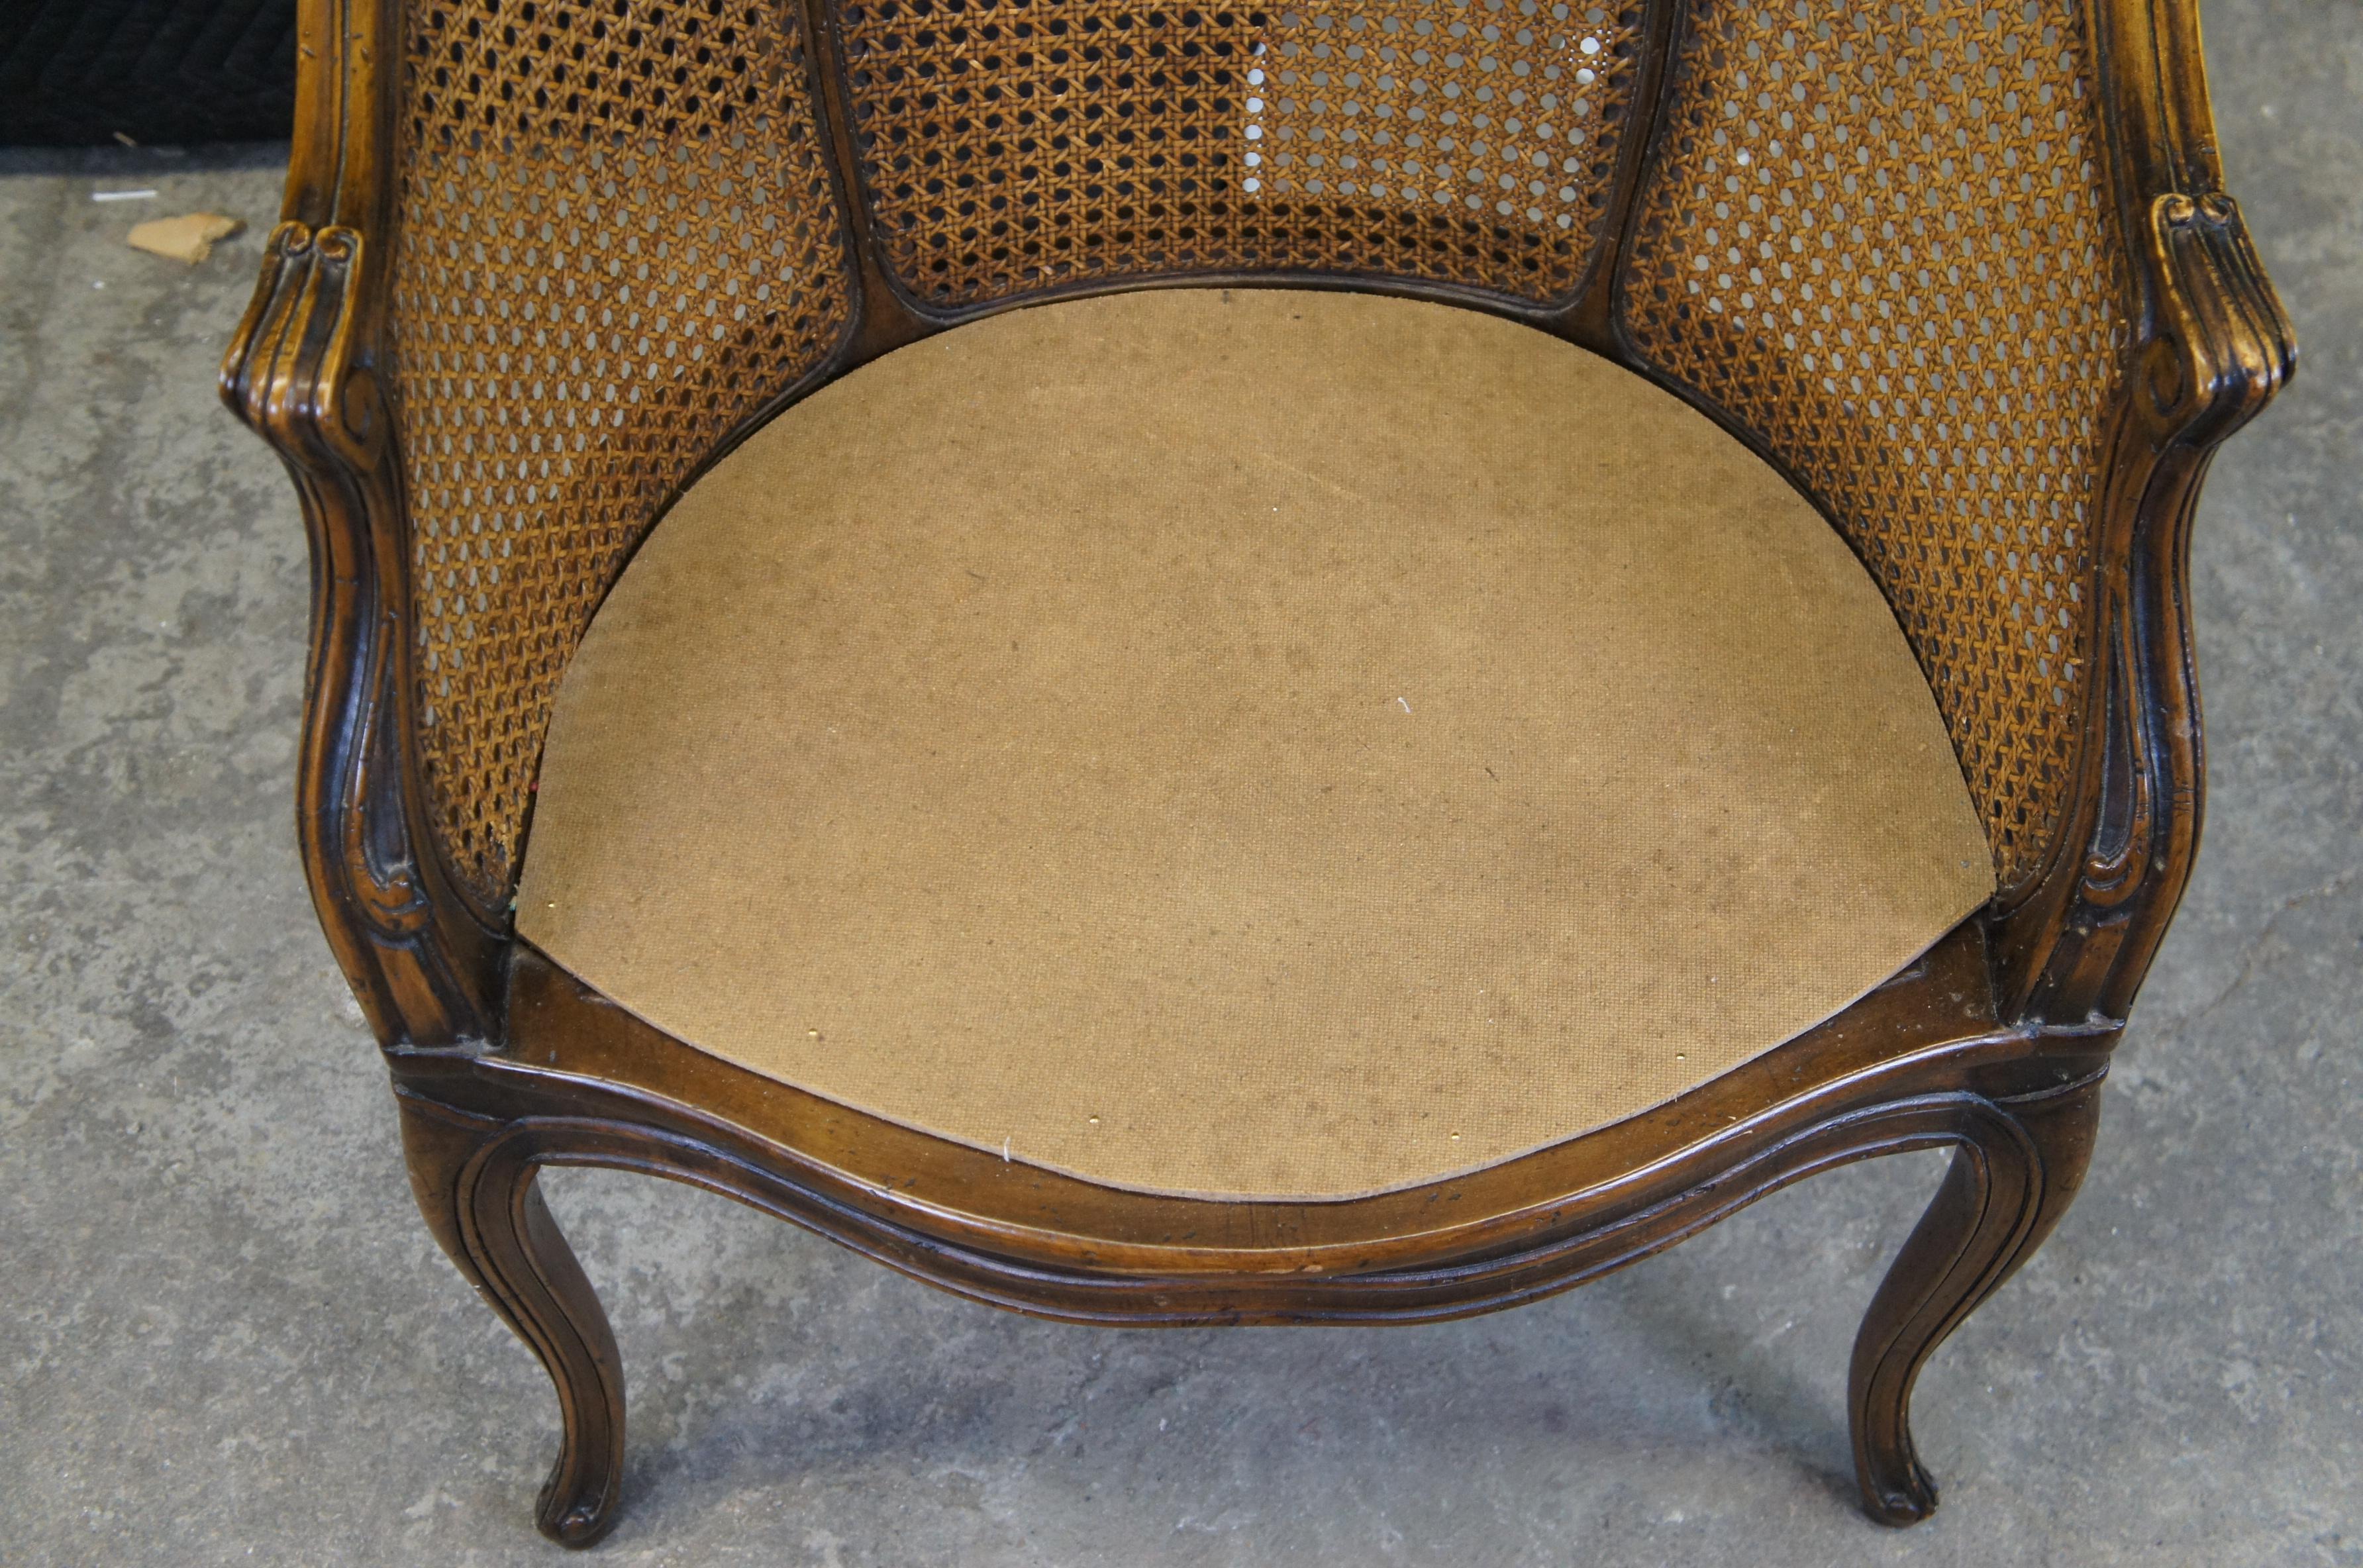 Upholstery Vintage French Louis XVI Caned Bergere Barrel Back Serpentine Club Lounge Chair